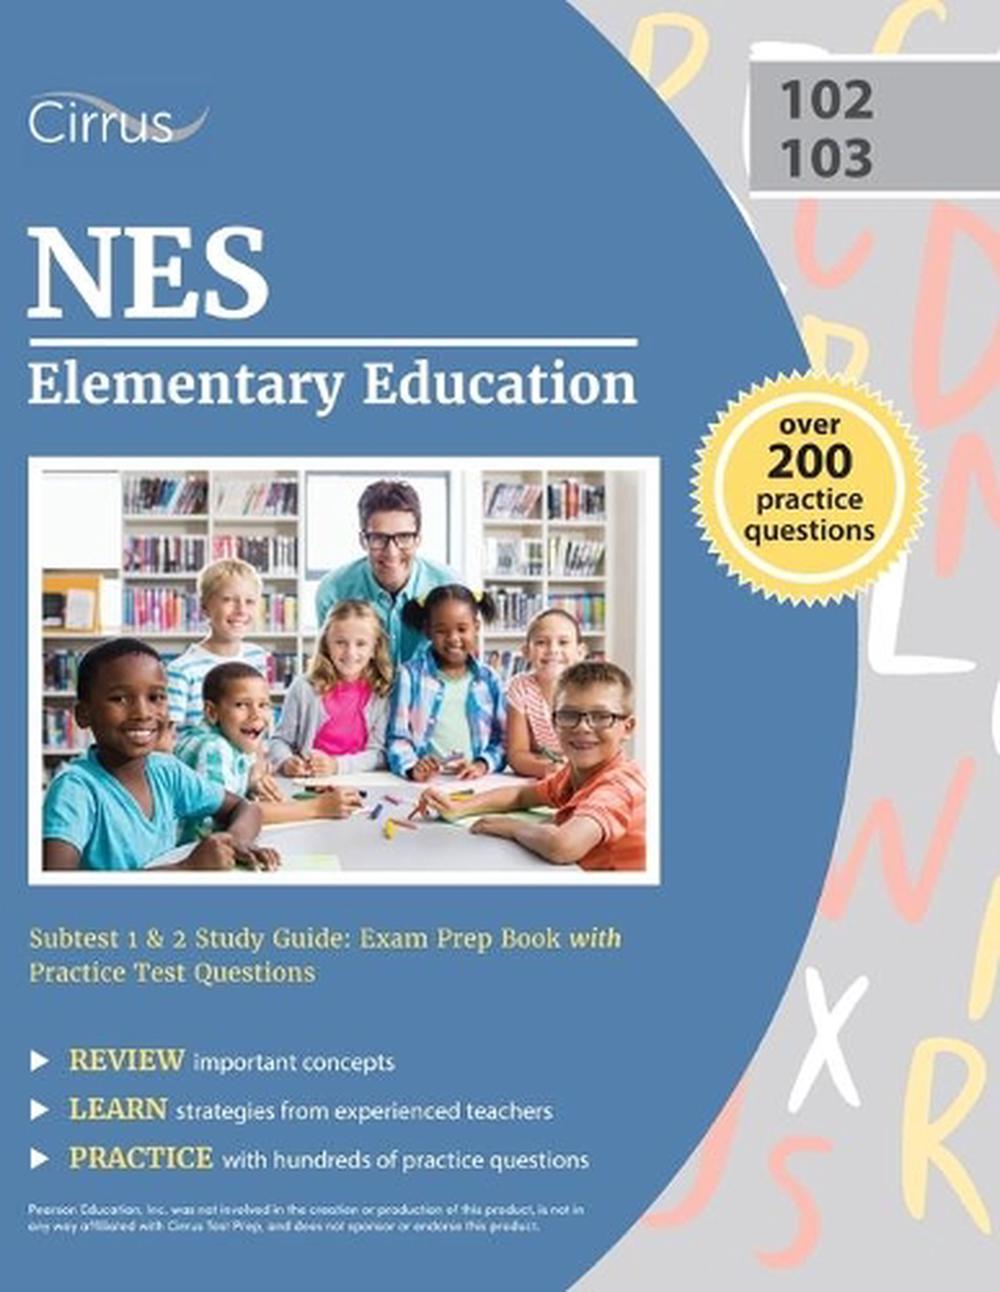 NES Elementary Education Subtest 1 & 2 Study Guide Exam Prep Book with Practice 9781635307900